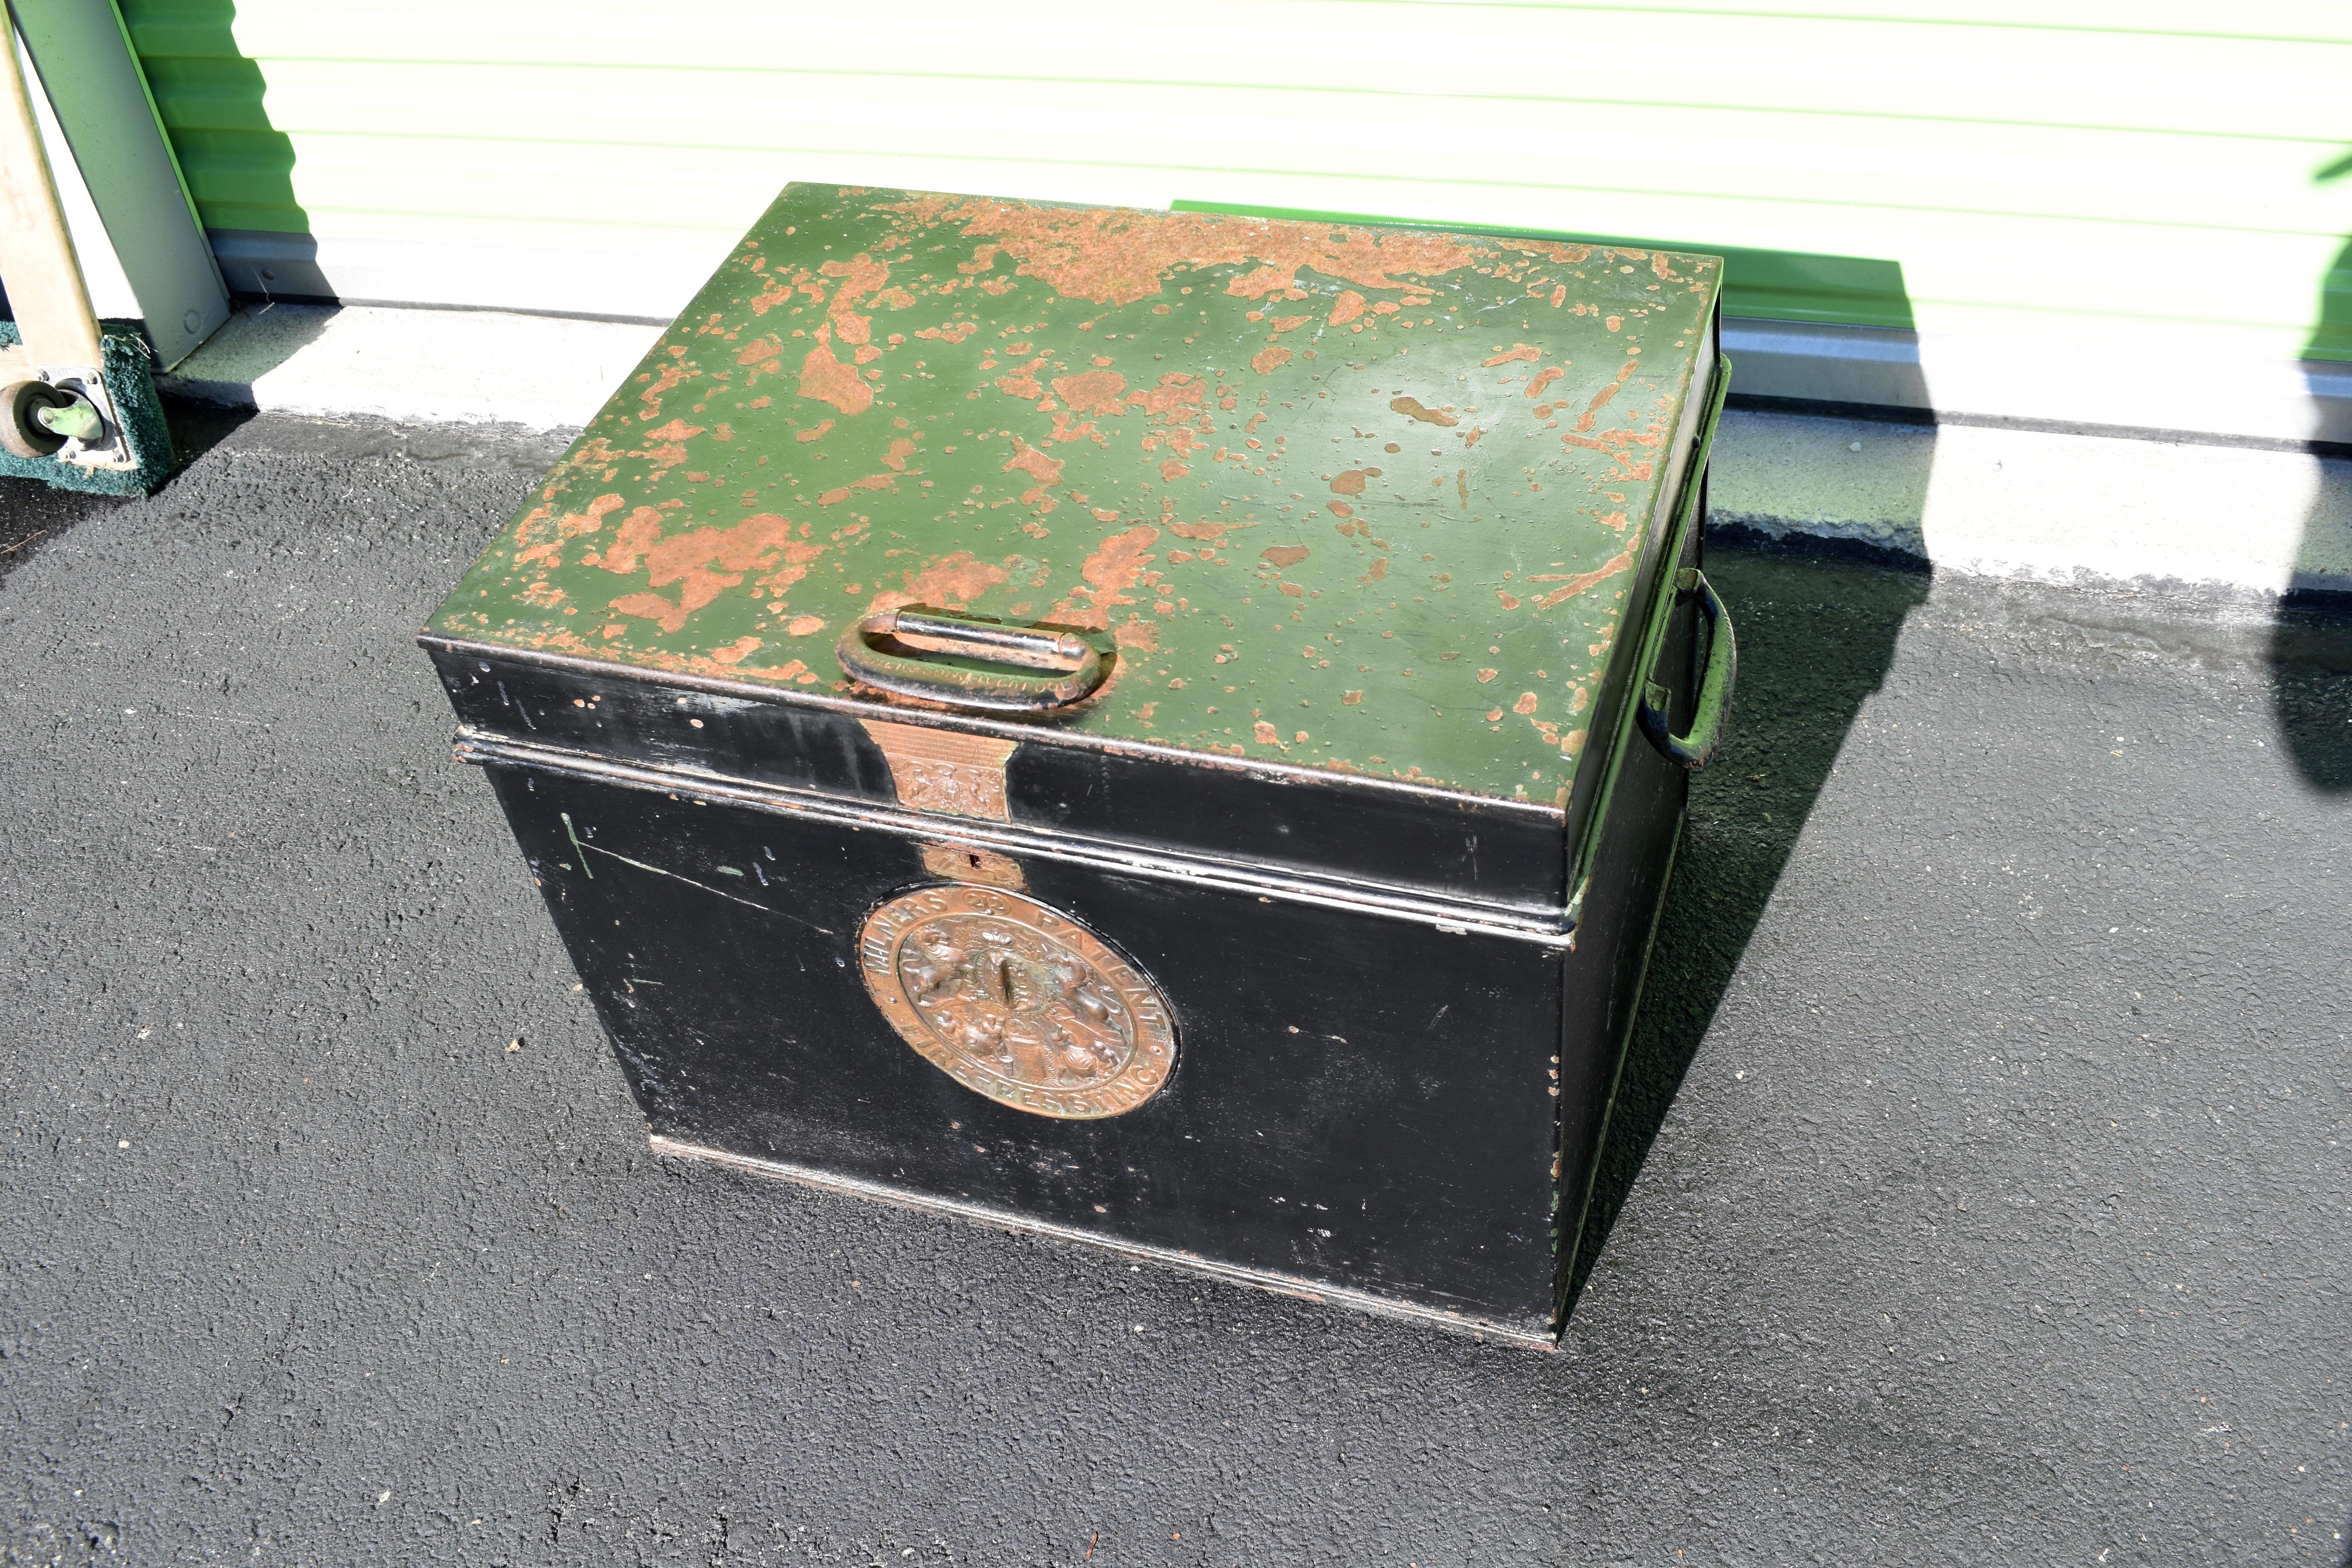 An English antique fire resistant Milners safe, painted green. This safe has a lovely natural patina, and the original bronze Milners plaque. A fire resistant safe box with interesting brass badges and steel carrying handles. The interior with